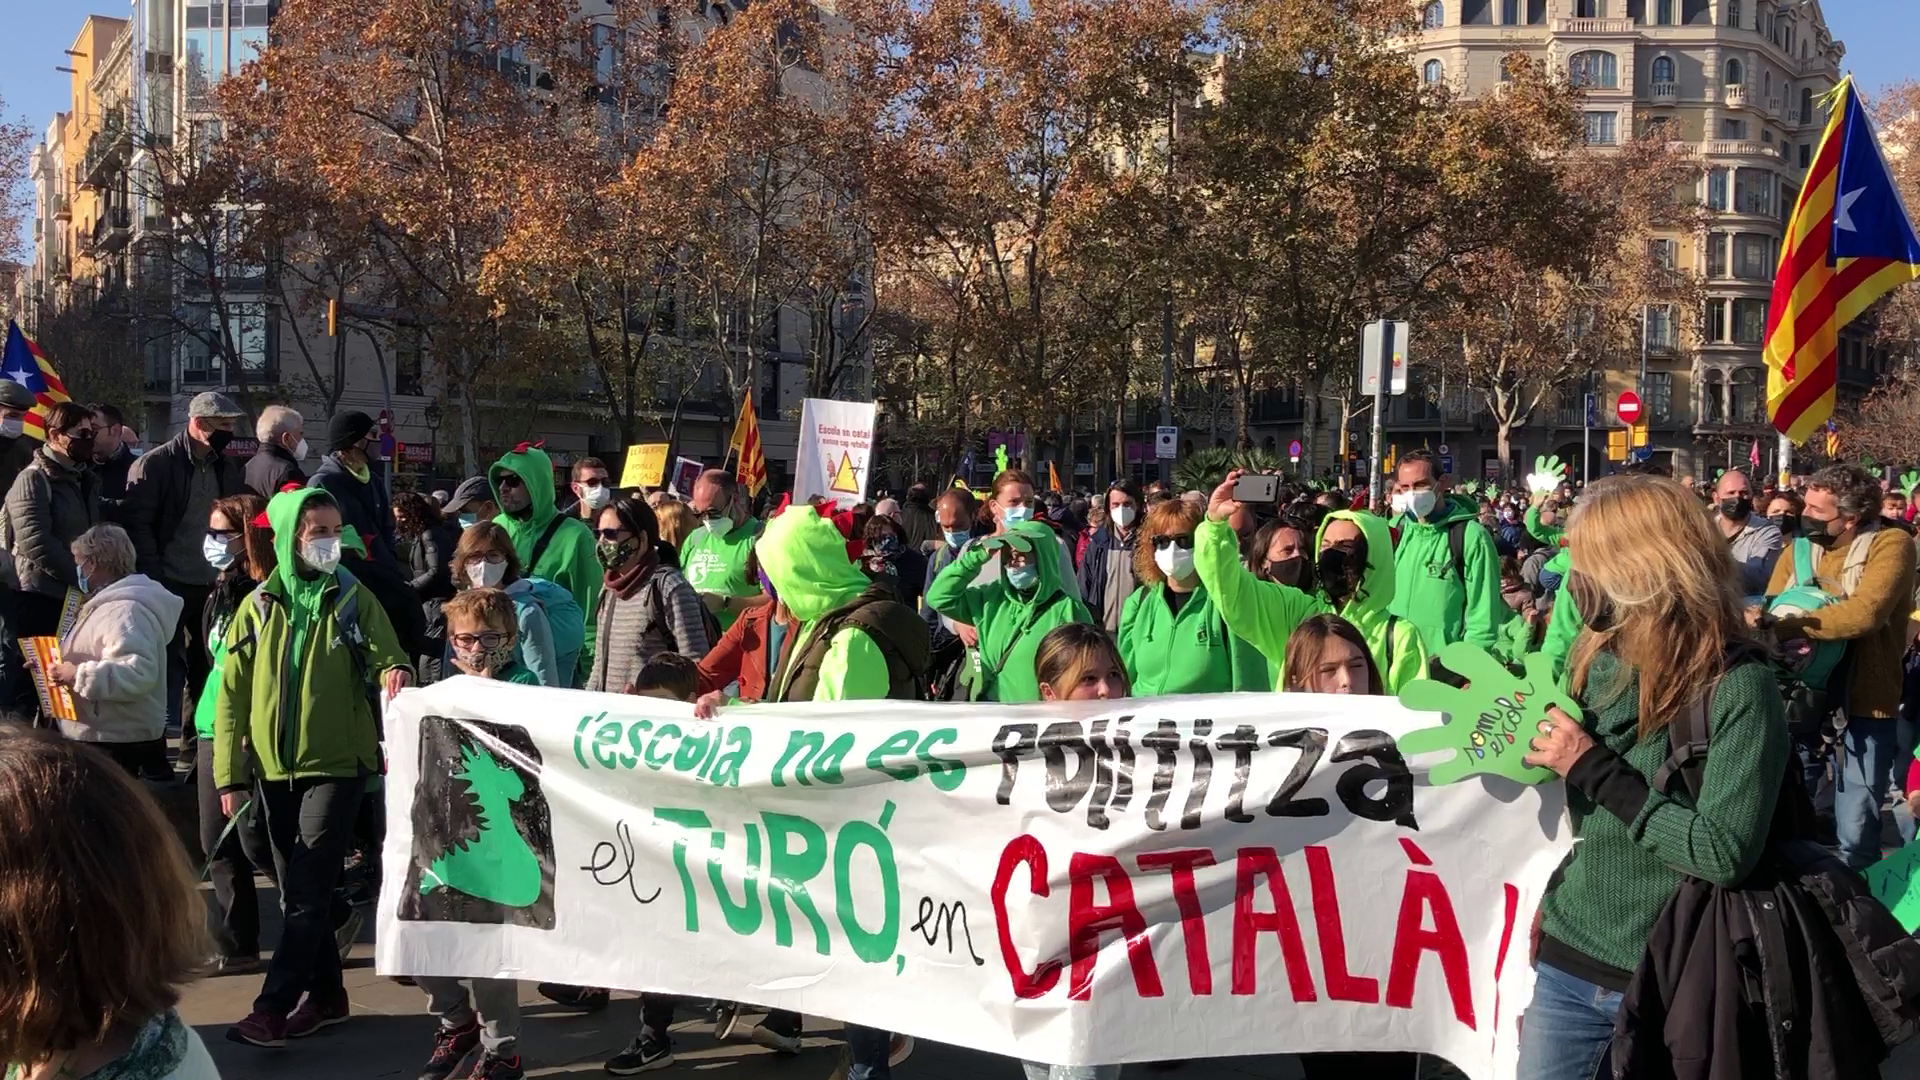 Turó del Drac school families at Barcelona's demonstration on December 18, 2021 (by Gerard Escaich Folch)